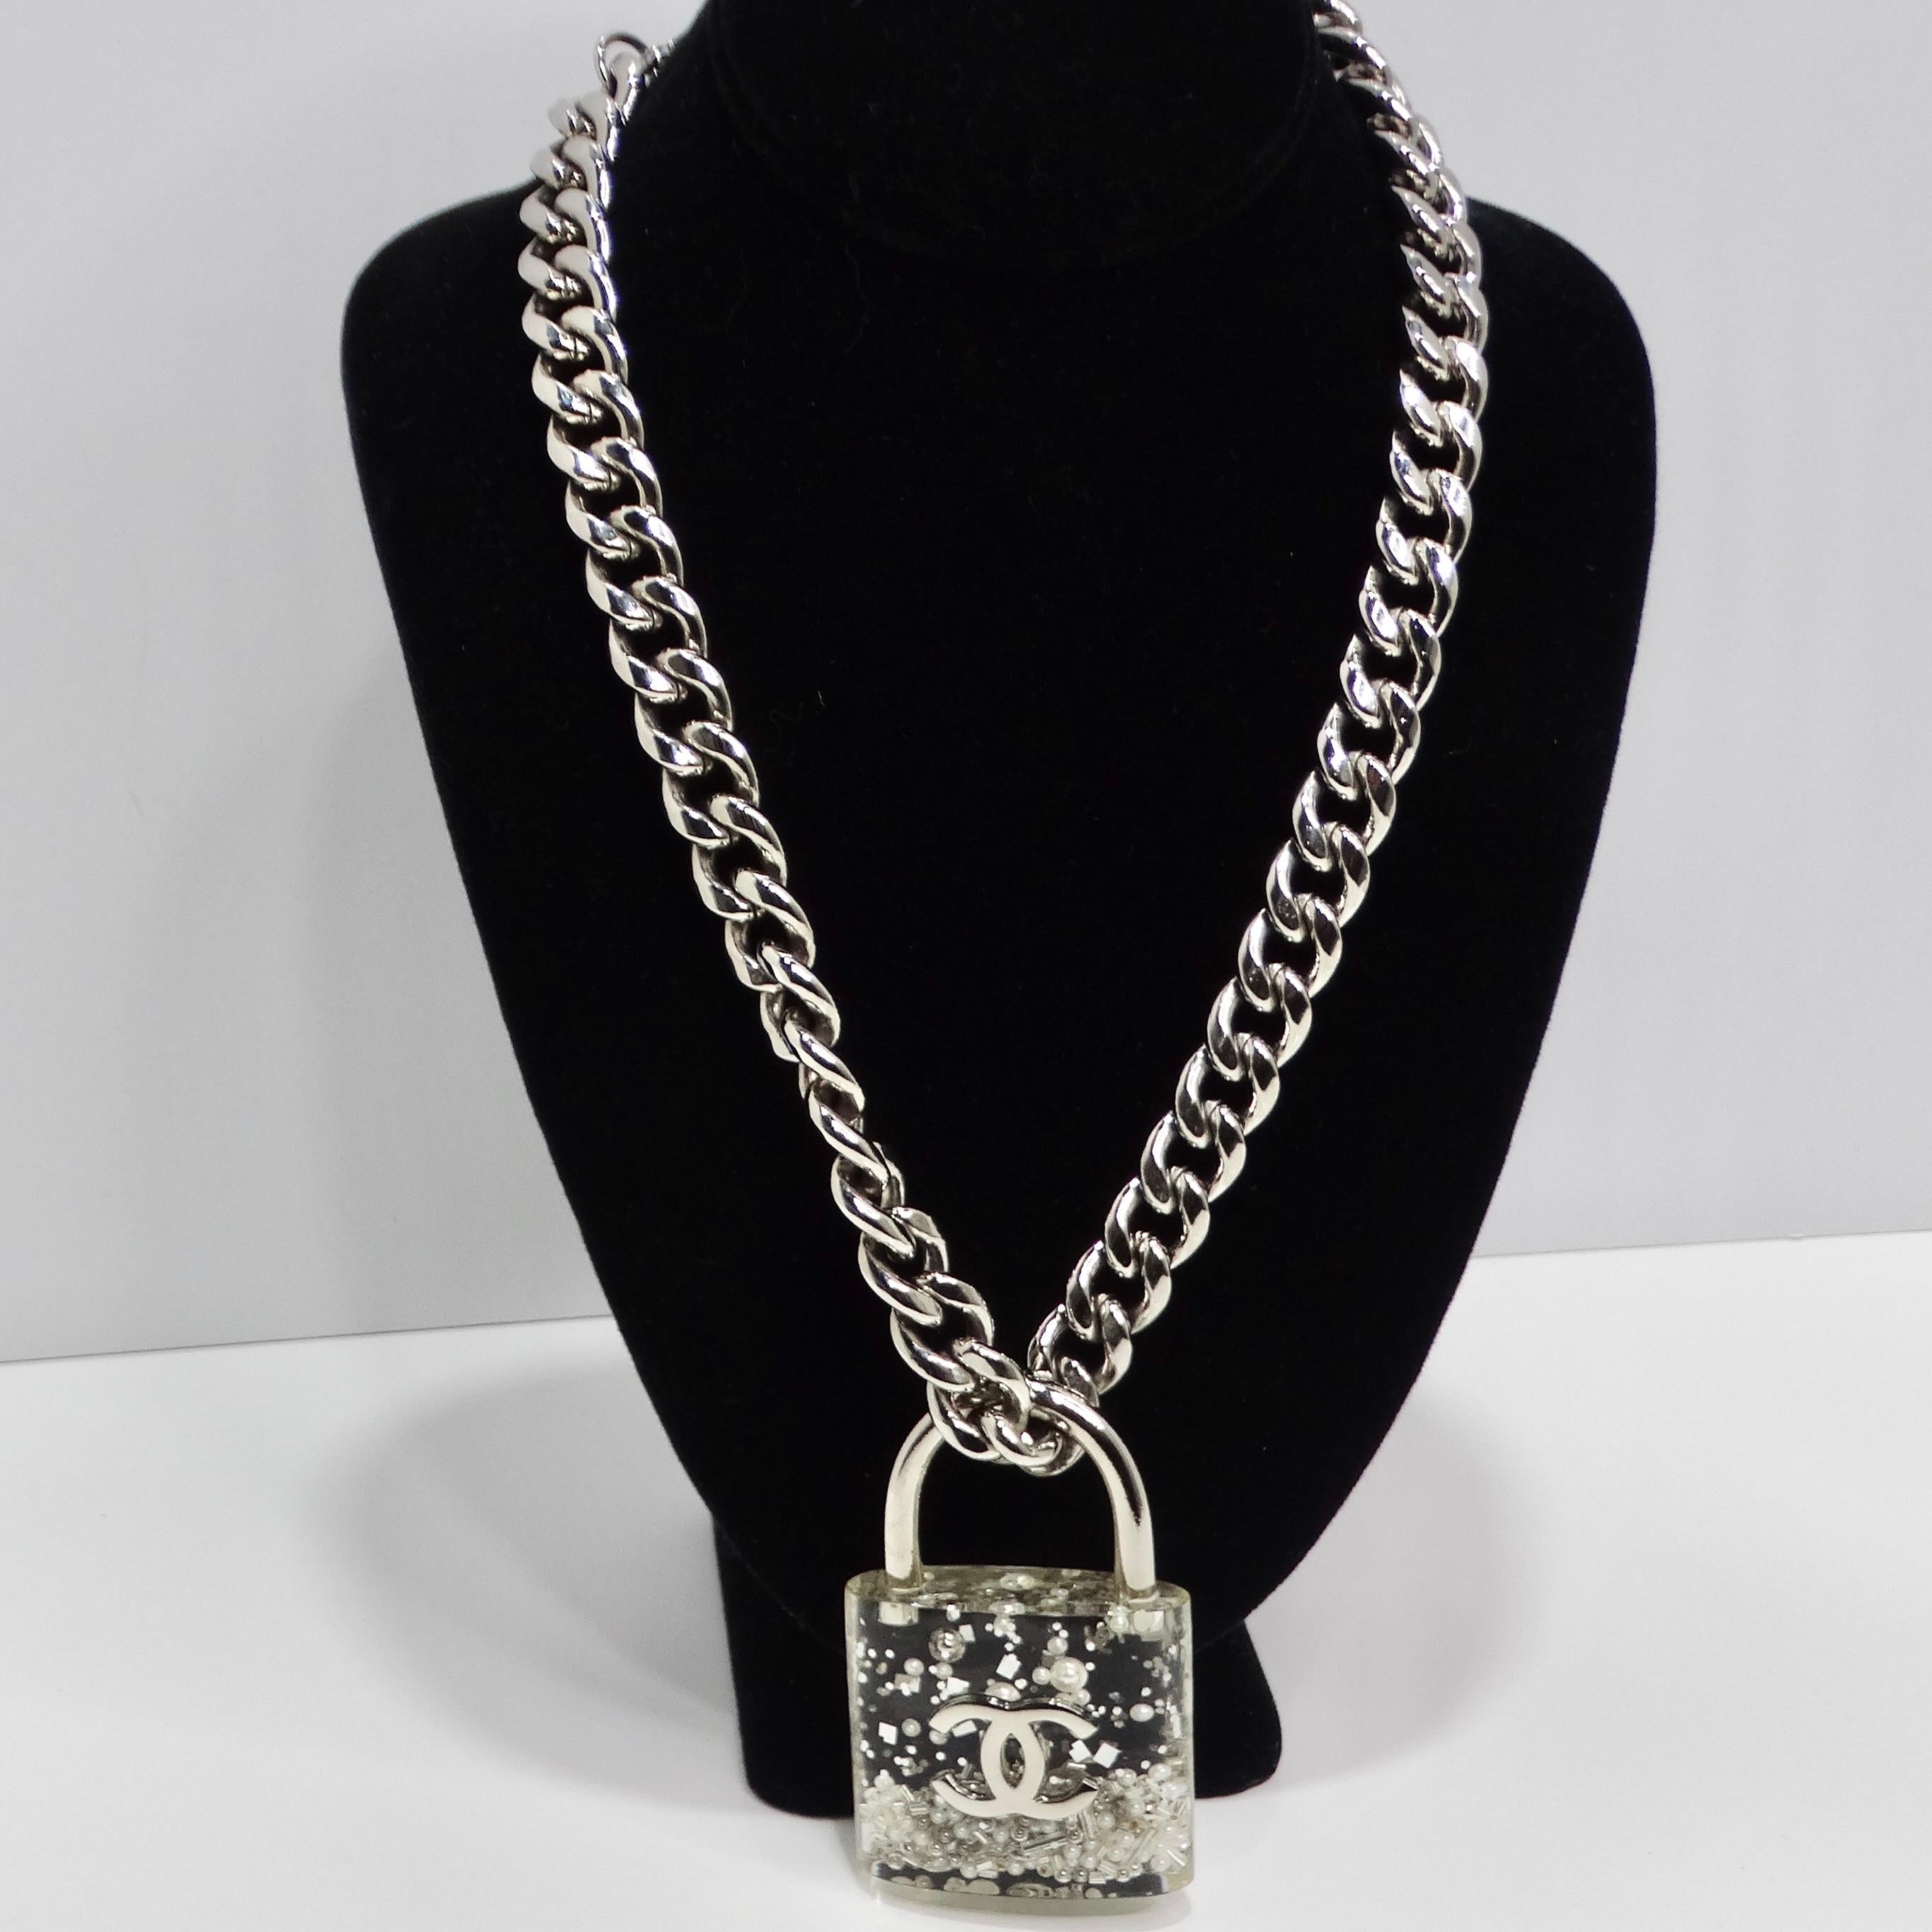 Introducing the Chanel 2014 CC Plexiglass Padlock Necklace, a bold and playful statement piece that exudes luxury and sophistication. This thick silver-tone chain necklace features a large plexiglass padlock filled with silver-tone beads and faux